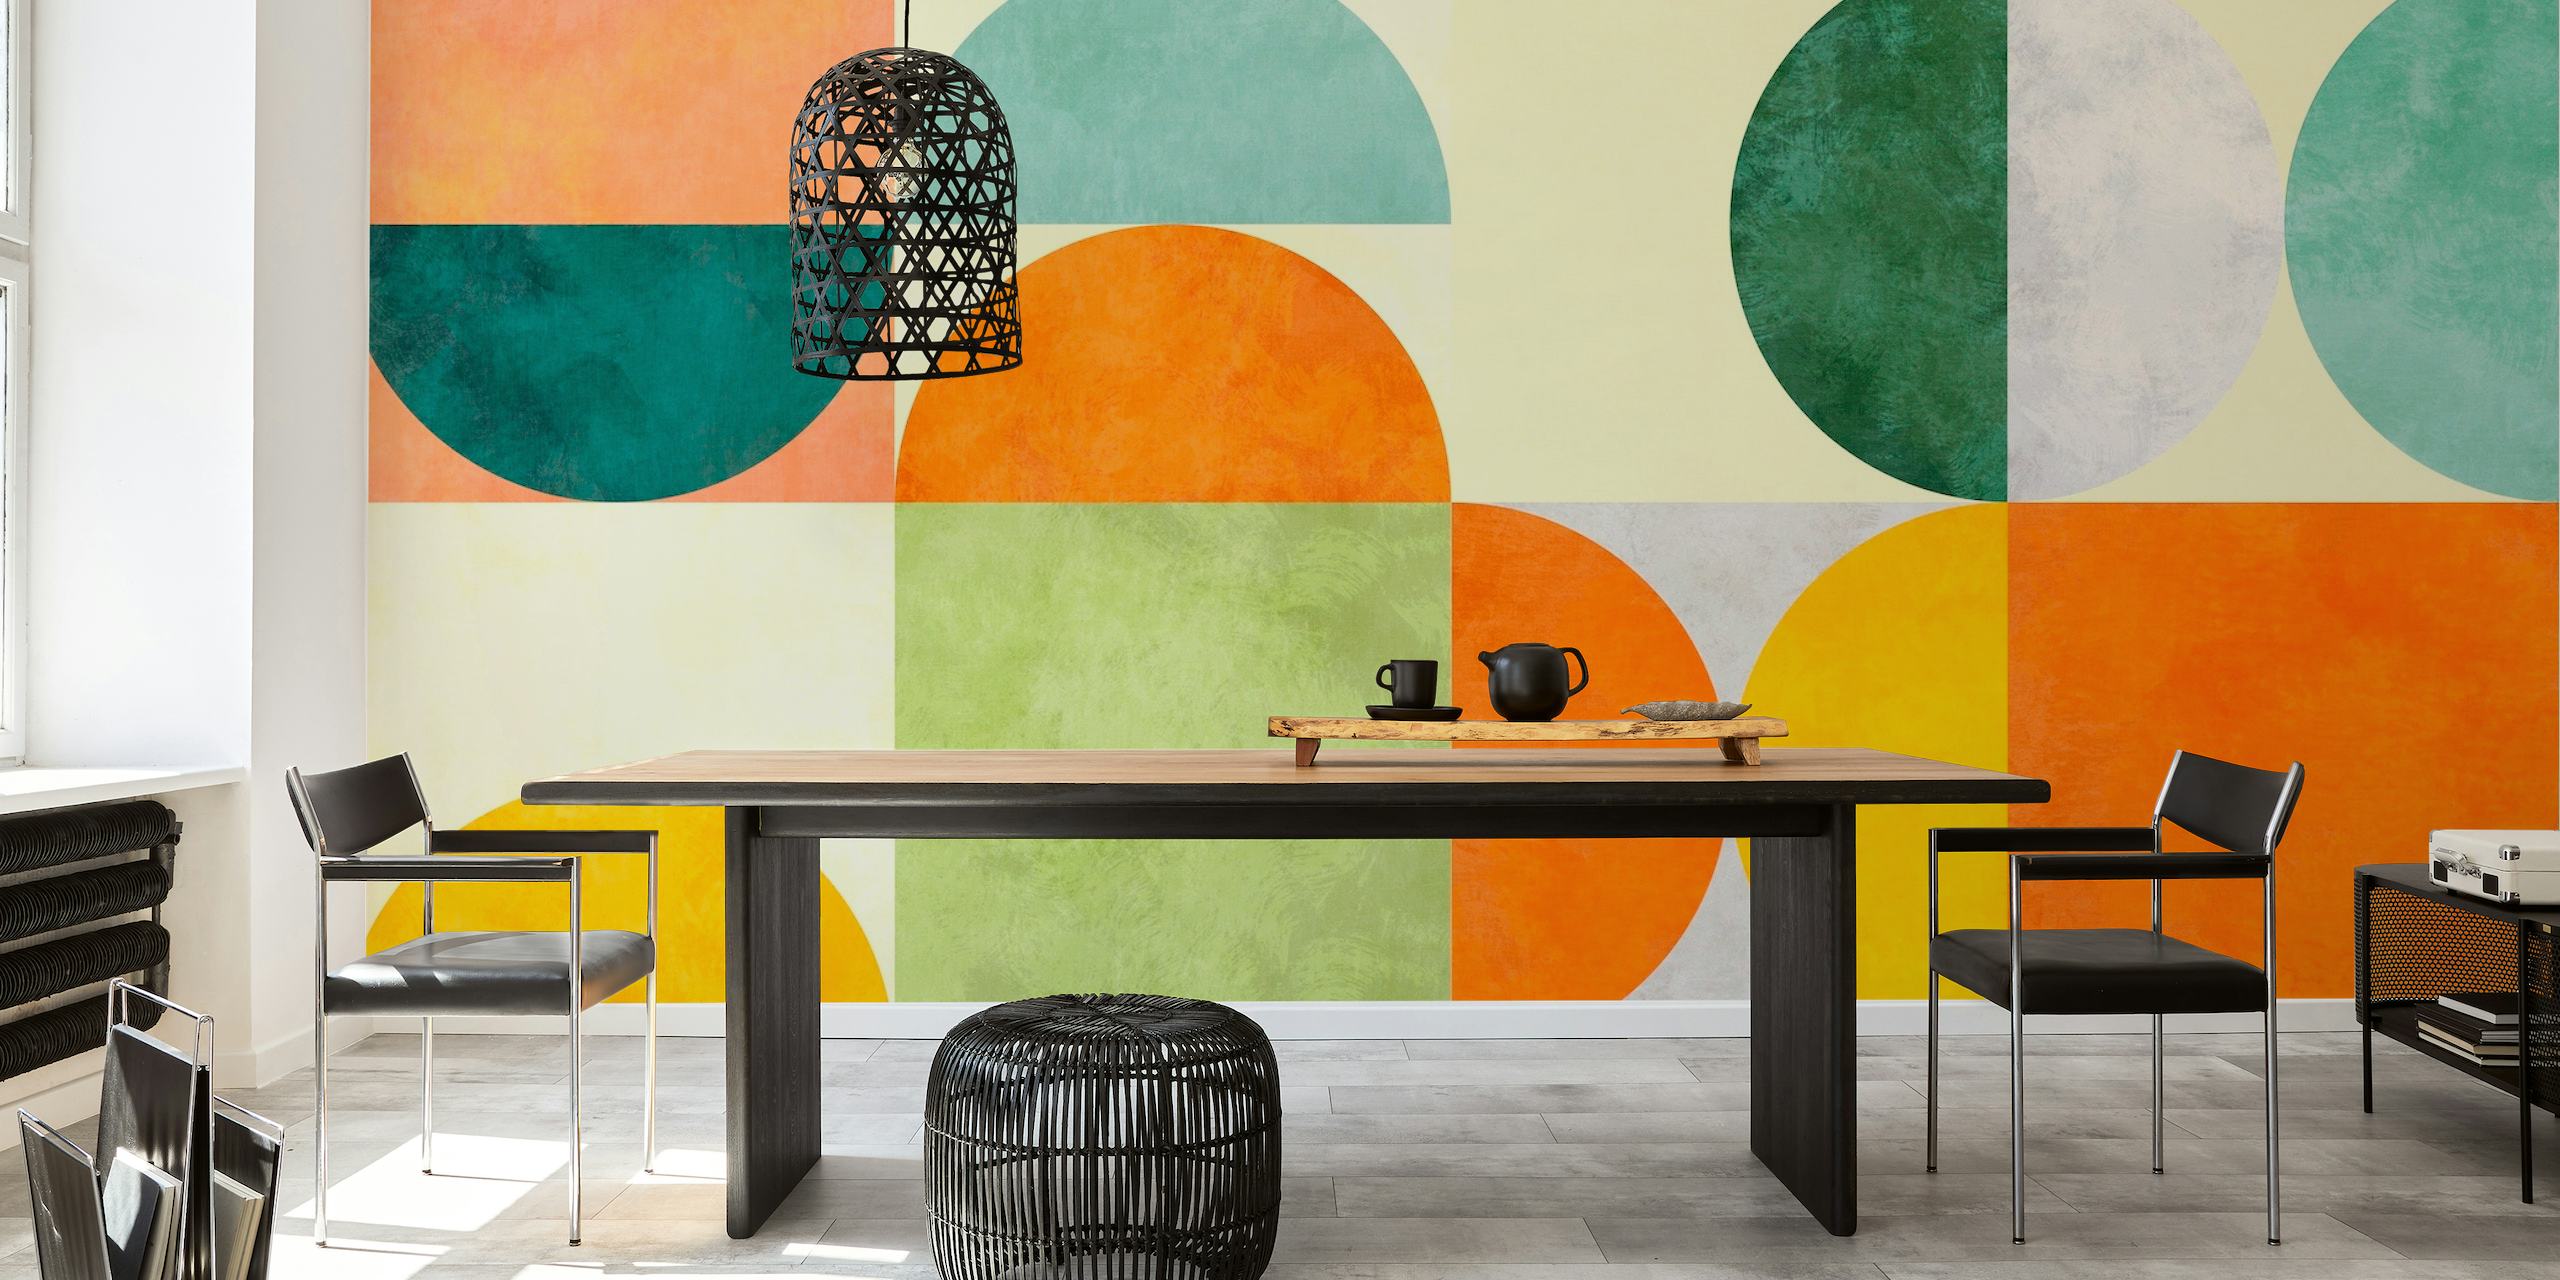 Bauhaus Retro Geometry 2 wall mural featuring minimalist shapes in pastel colors